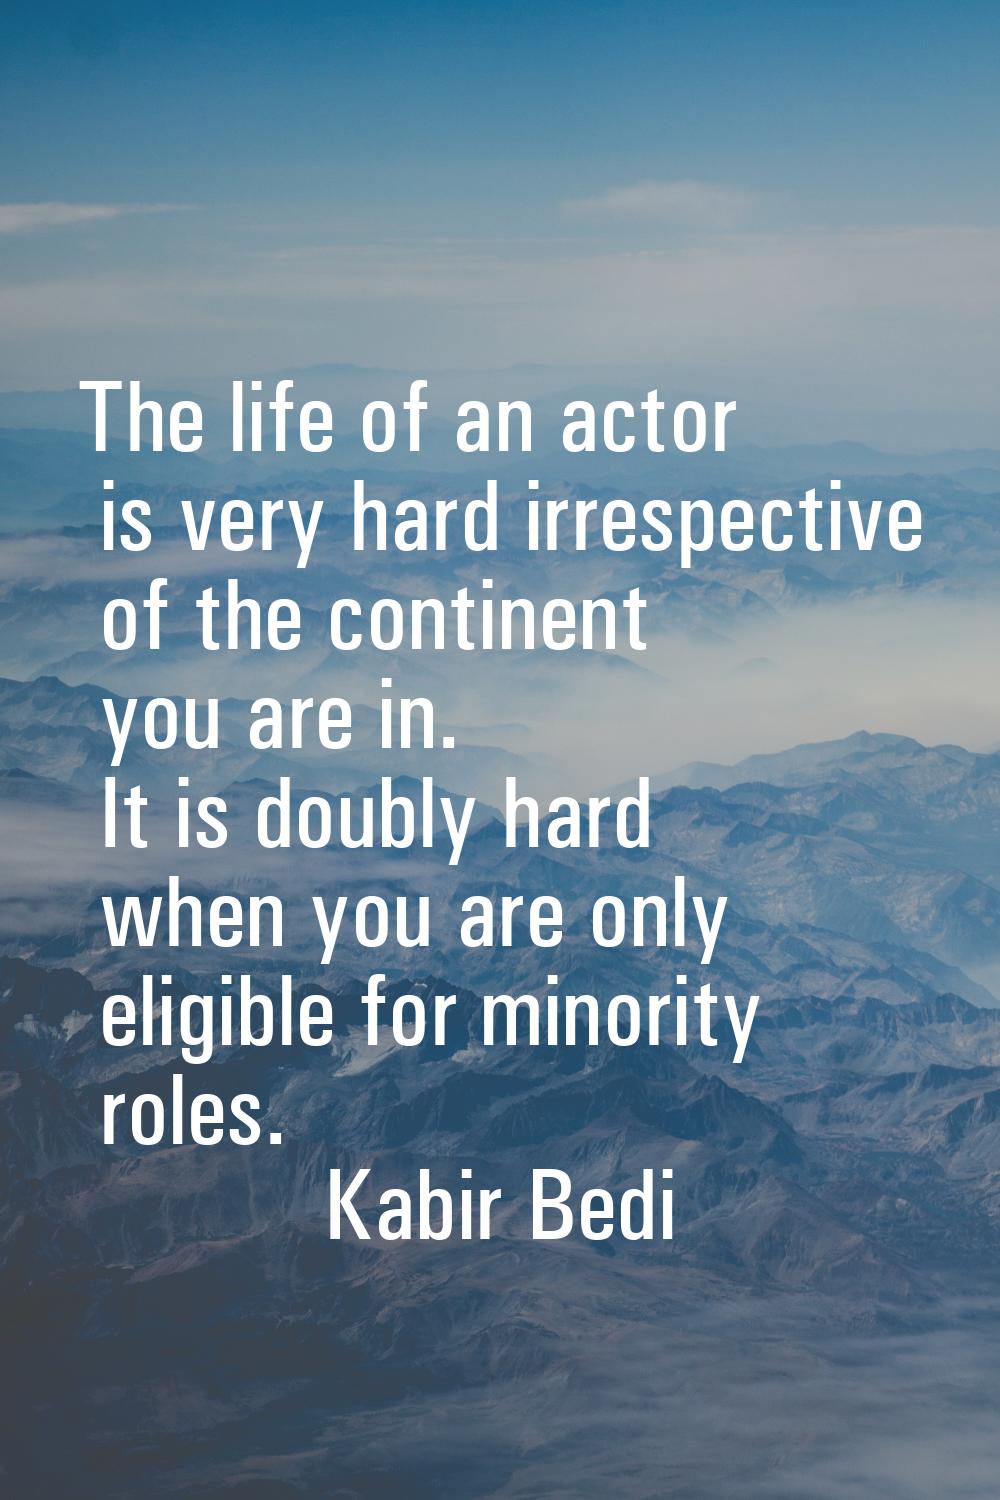 The life of an actor is very hard irrespective of the continent you are in. It is doubly hard when 